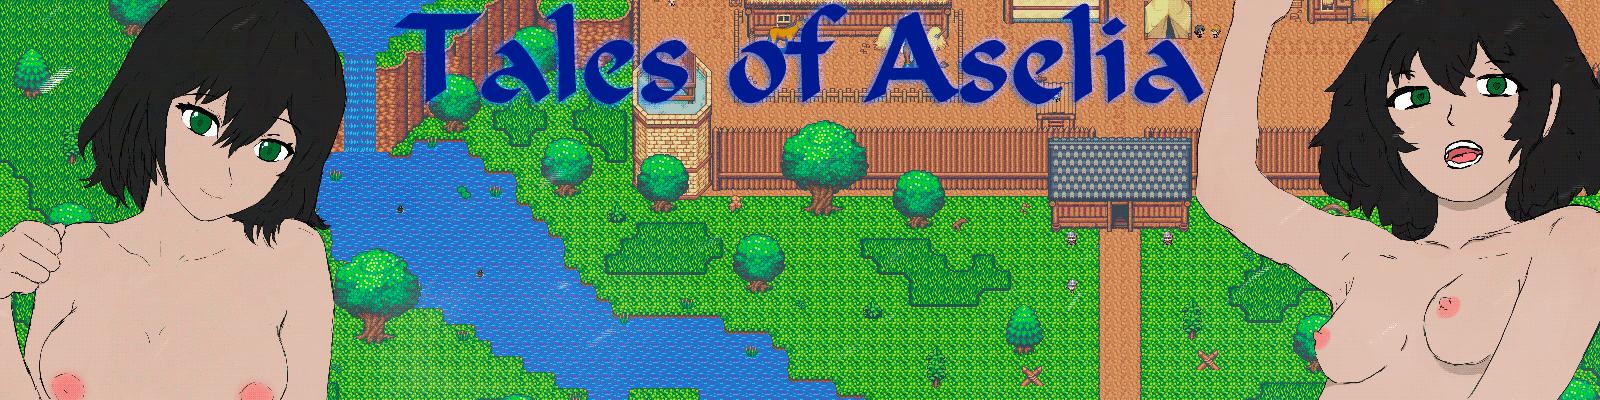 Tales of Aselia v0.11 by masqetch